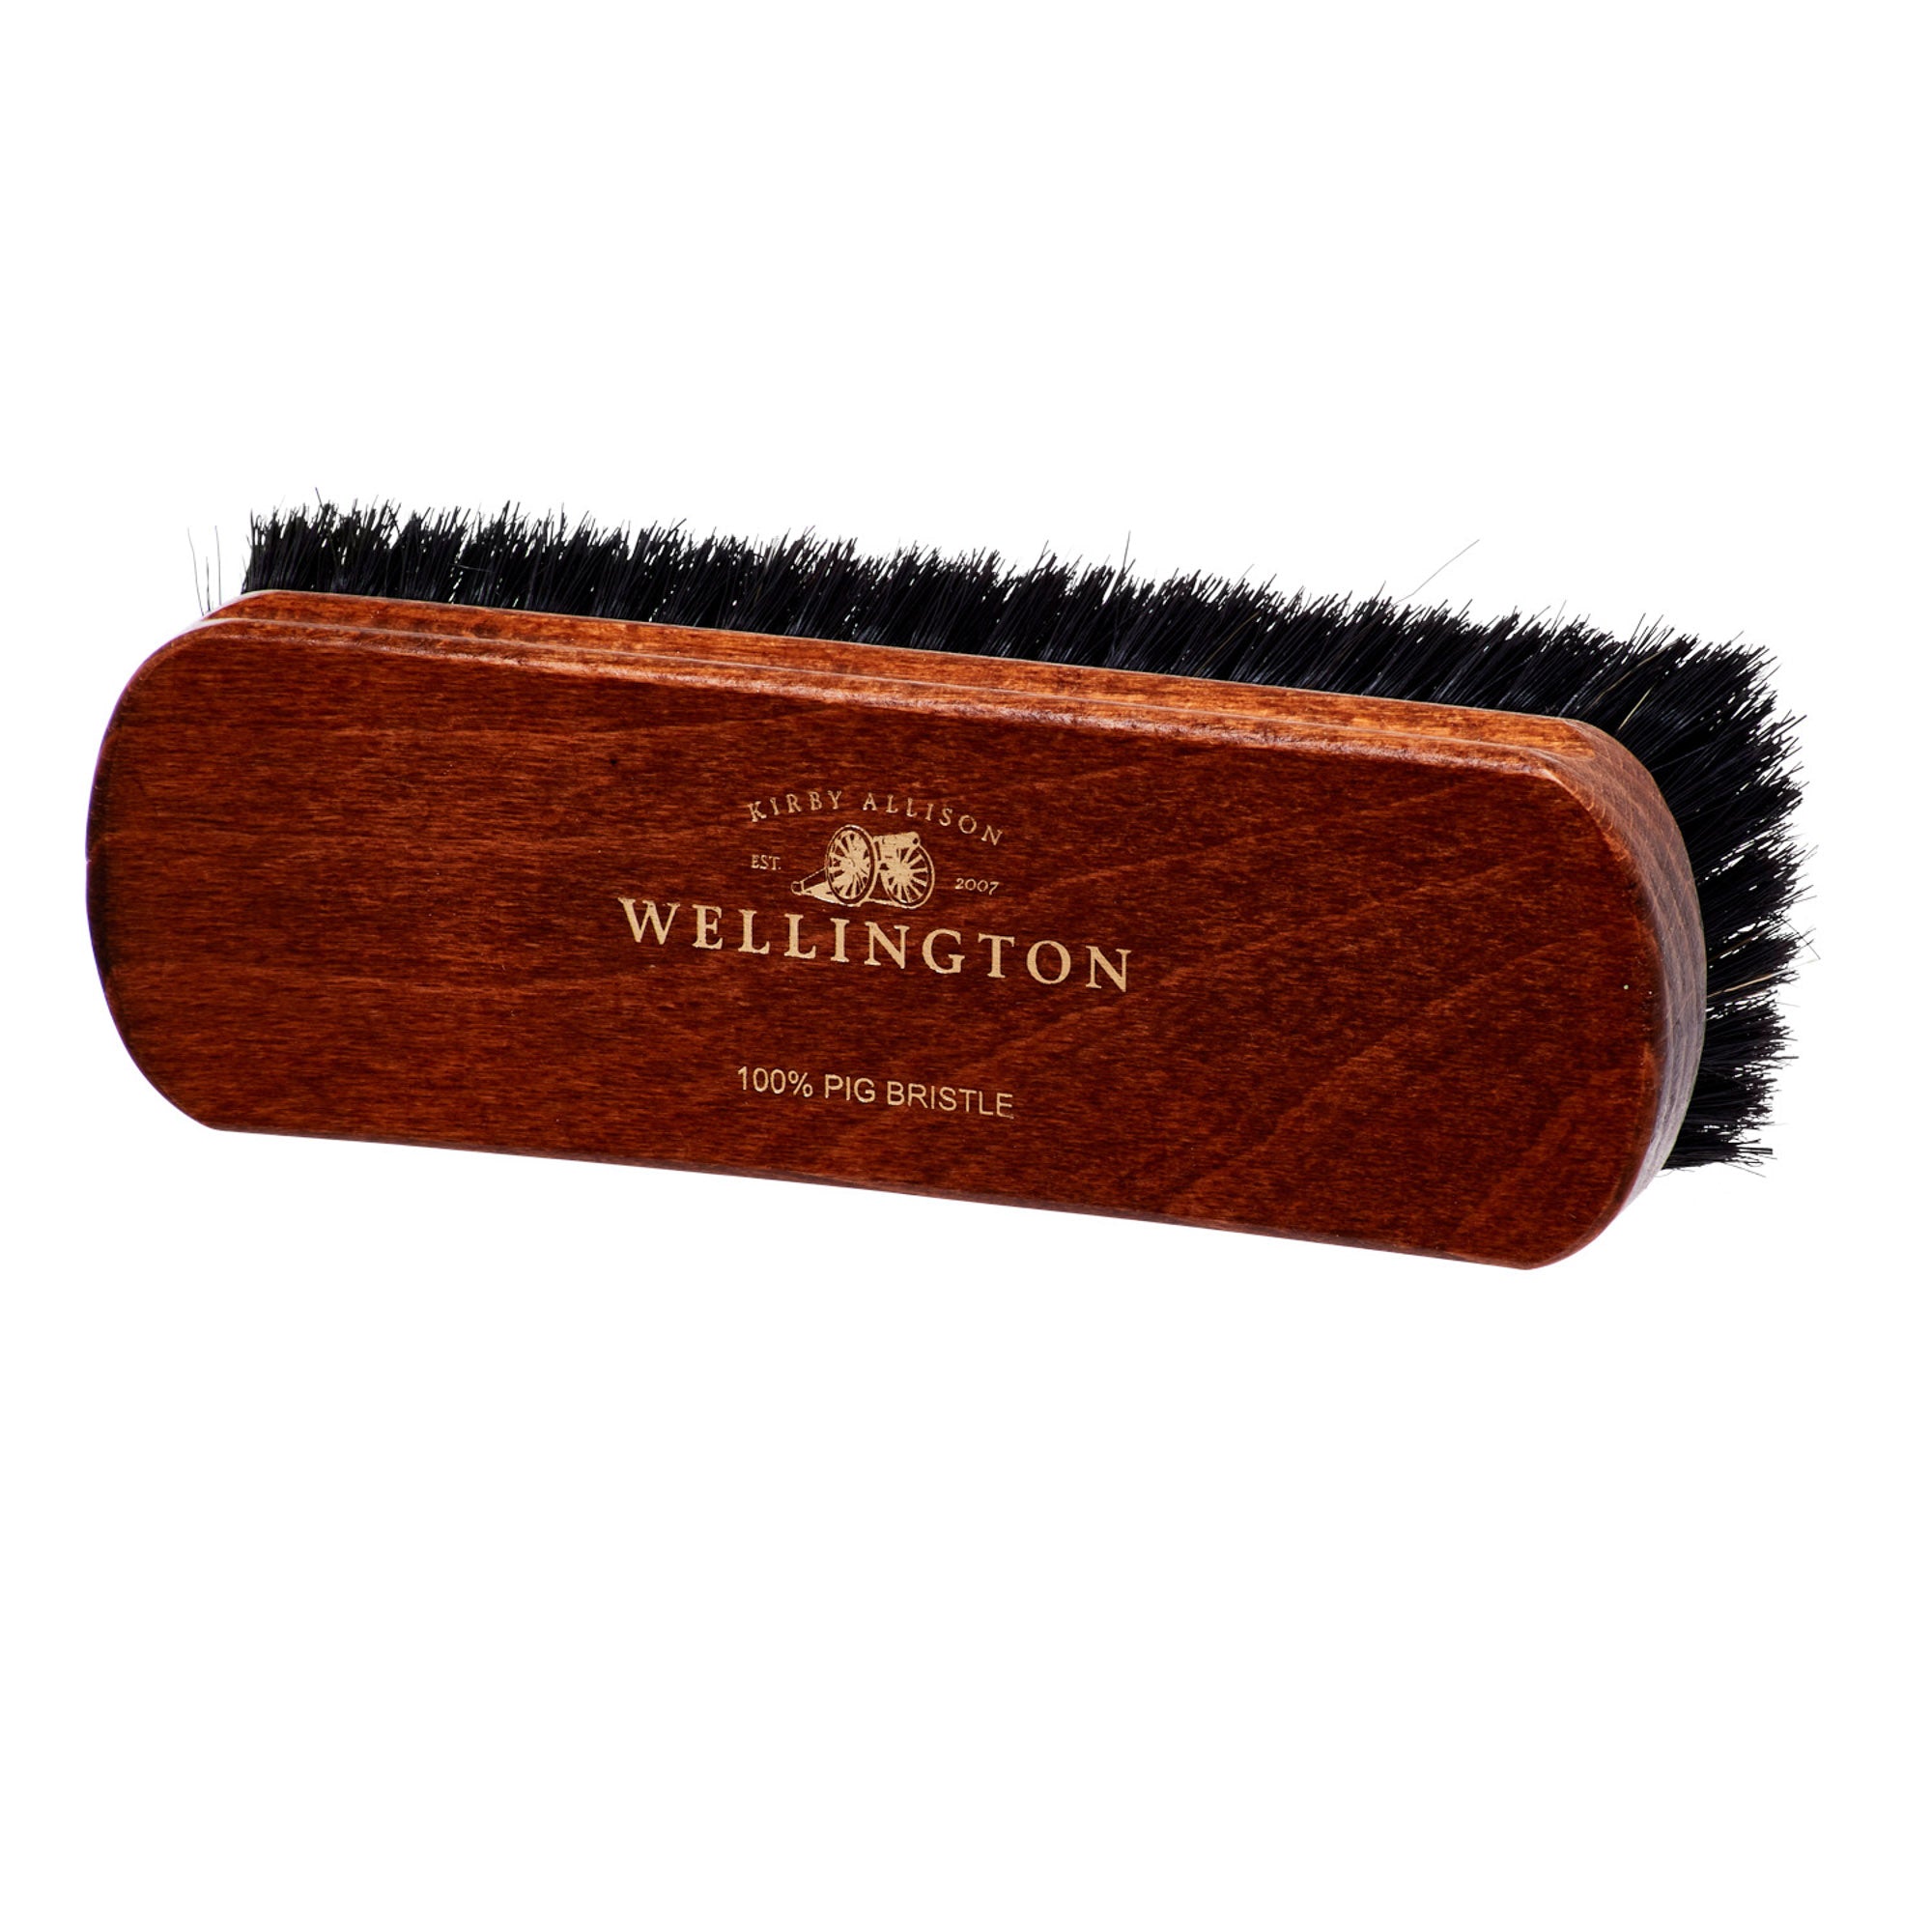 A Deluxe Wellington Pig Bristle Shoe Polishing Brush with black bristles on a white background by KirbyAllison.com.